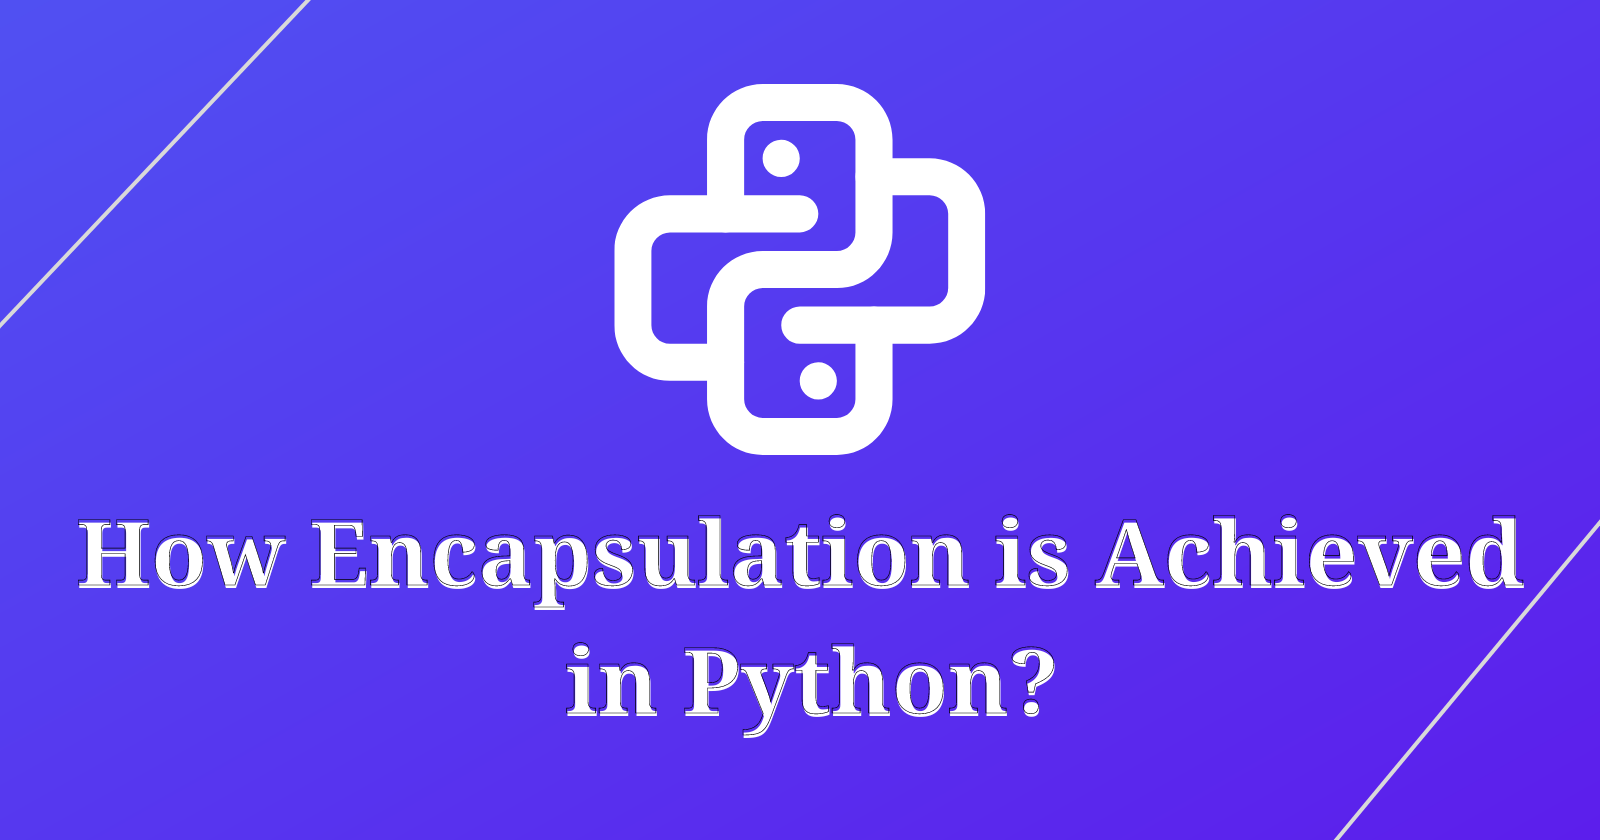 How Encapsulation is Achieved in Python?